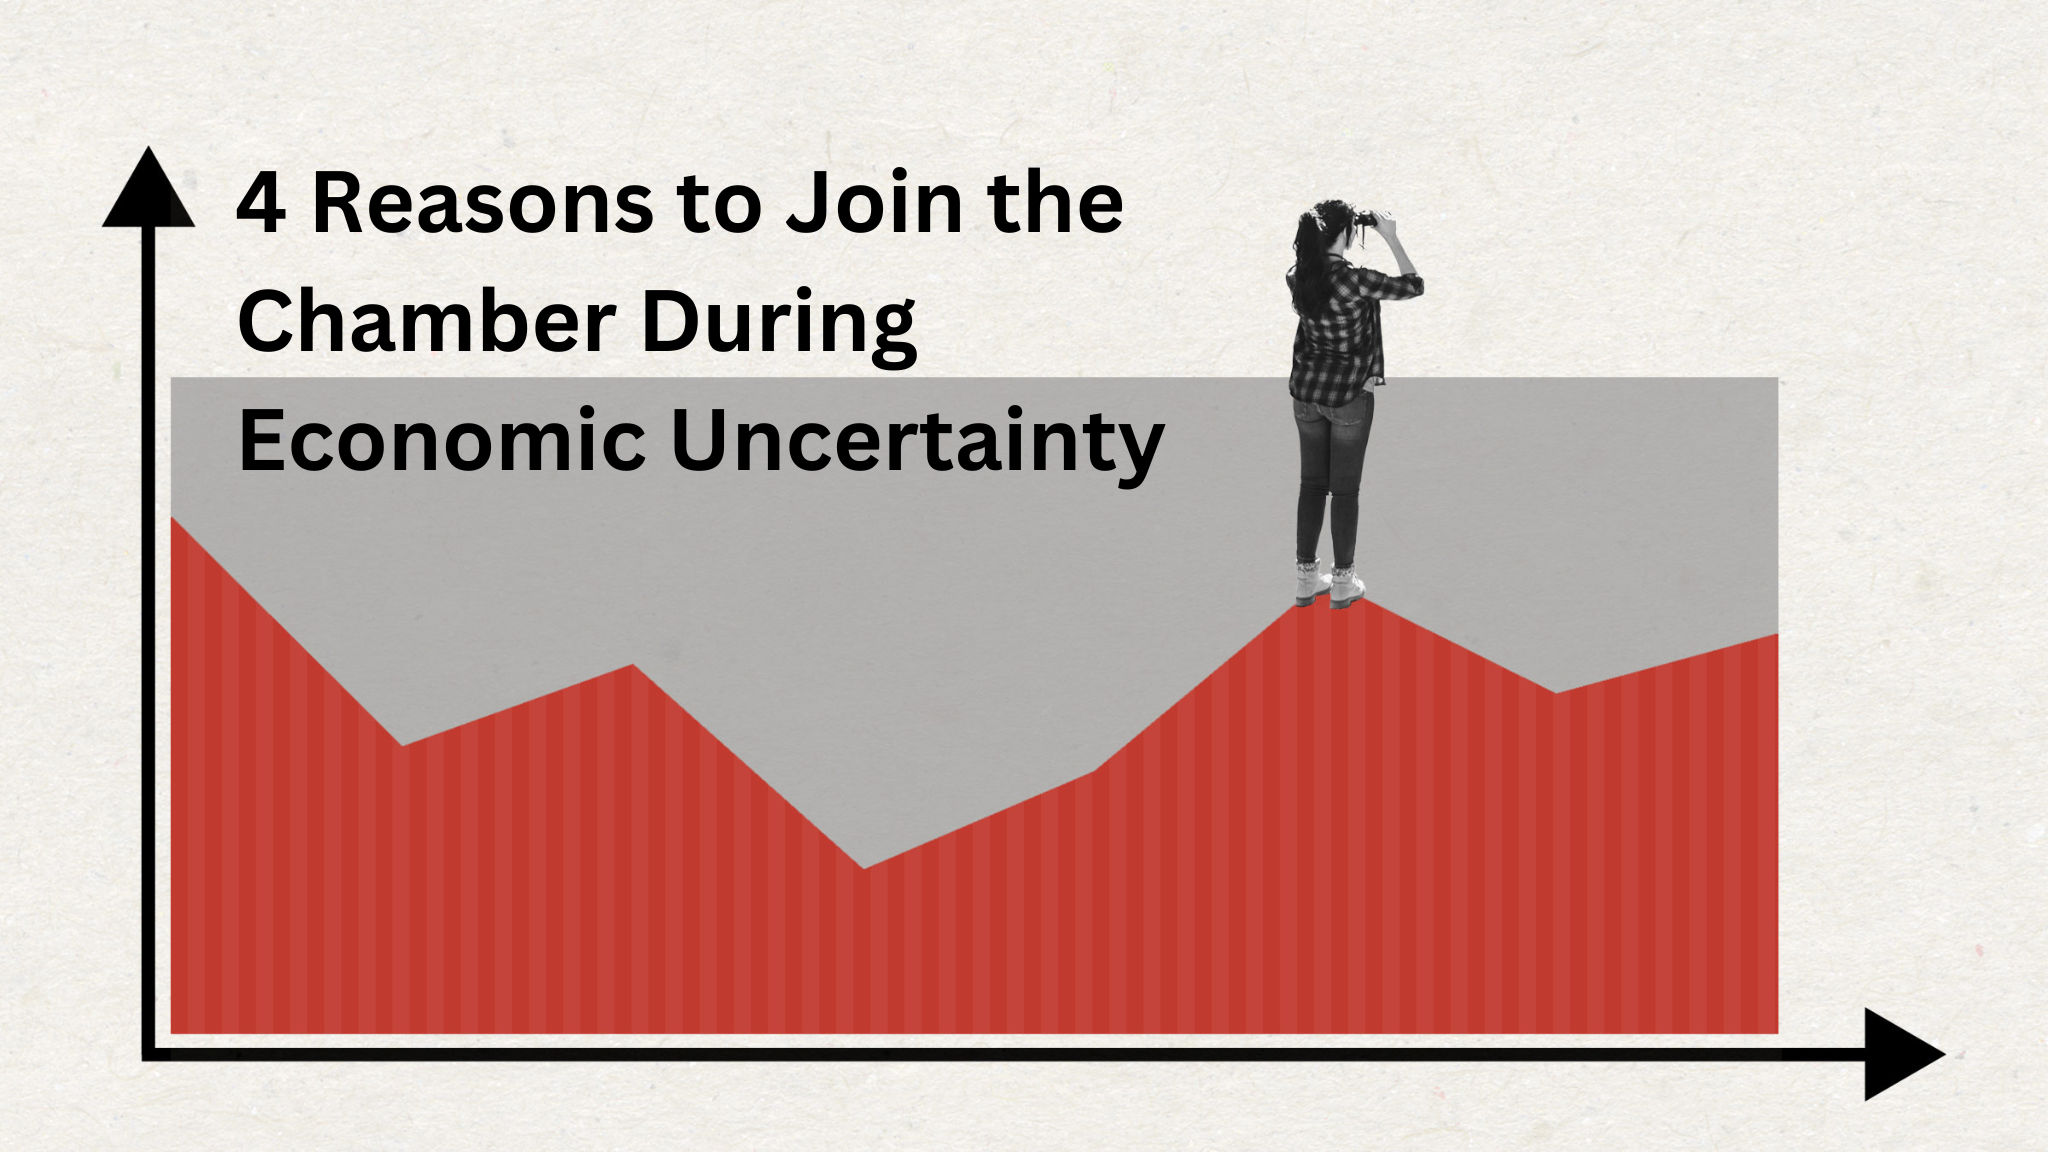 4 Reasons to Join the Chamber in a Time of Economic Uncertainty